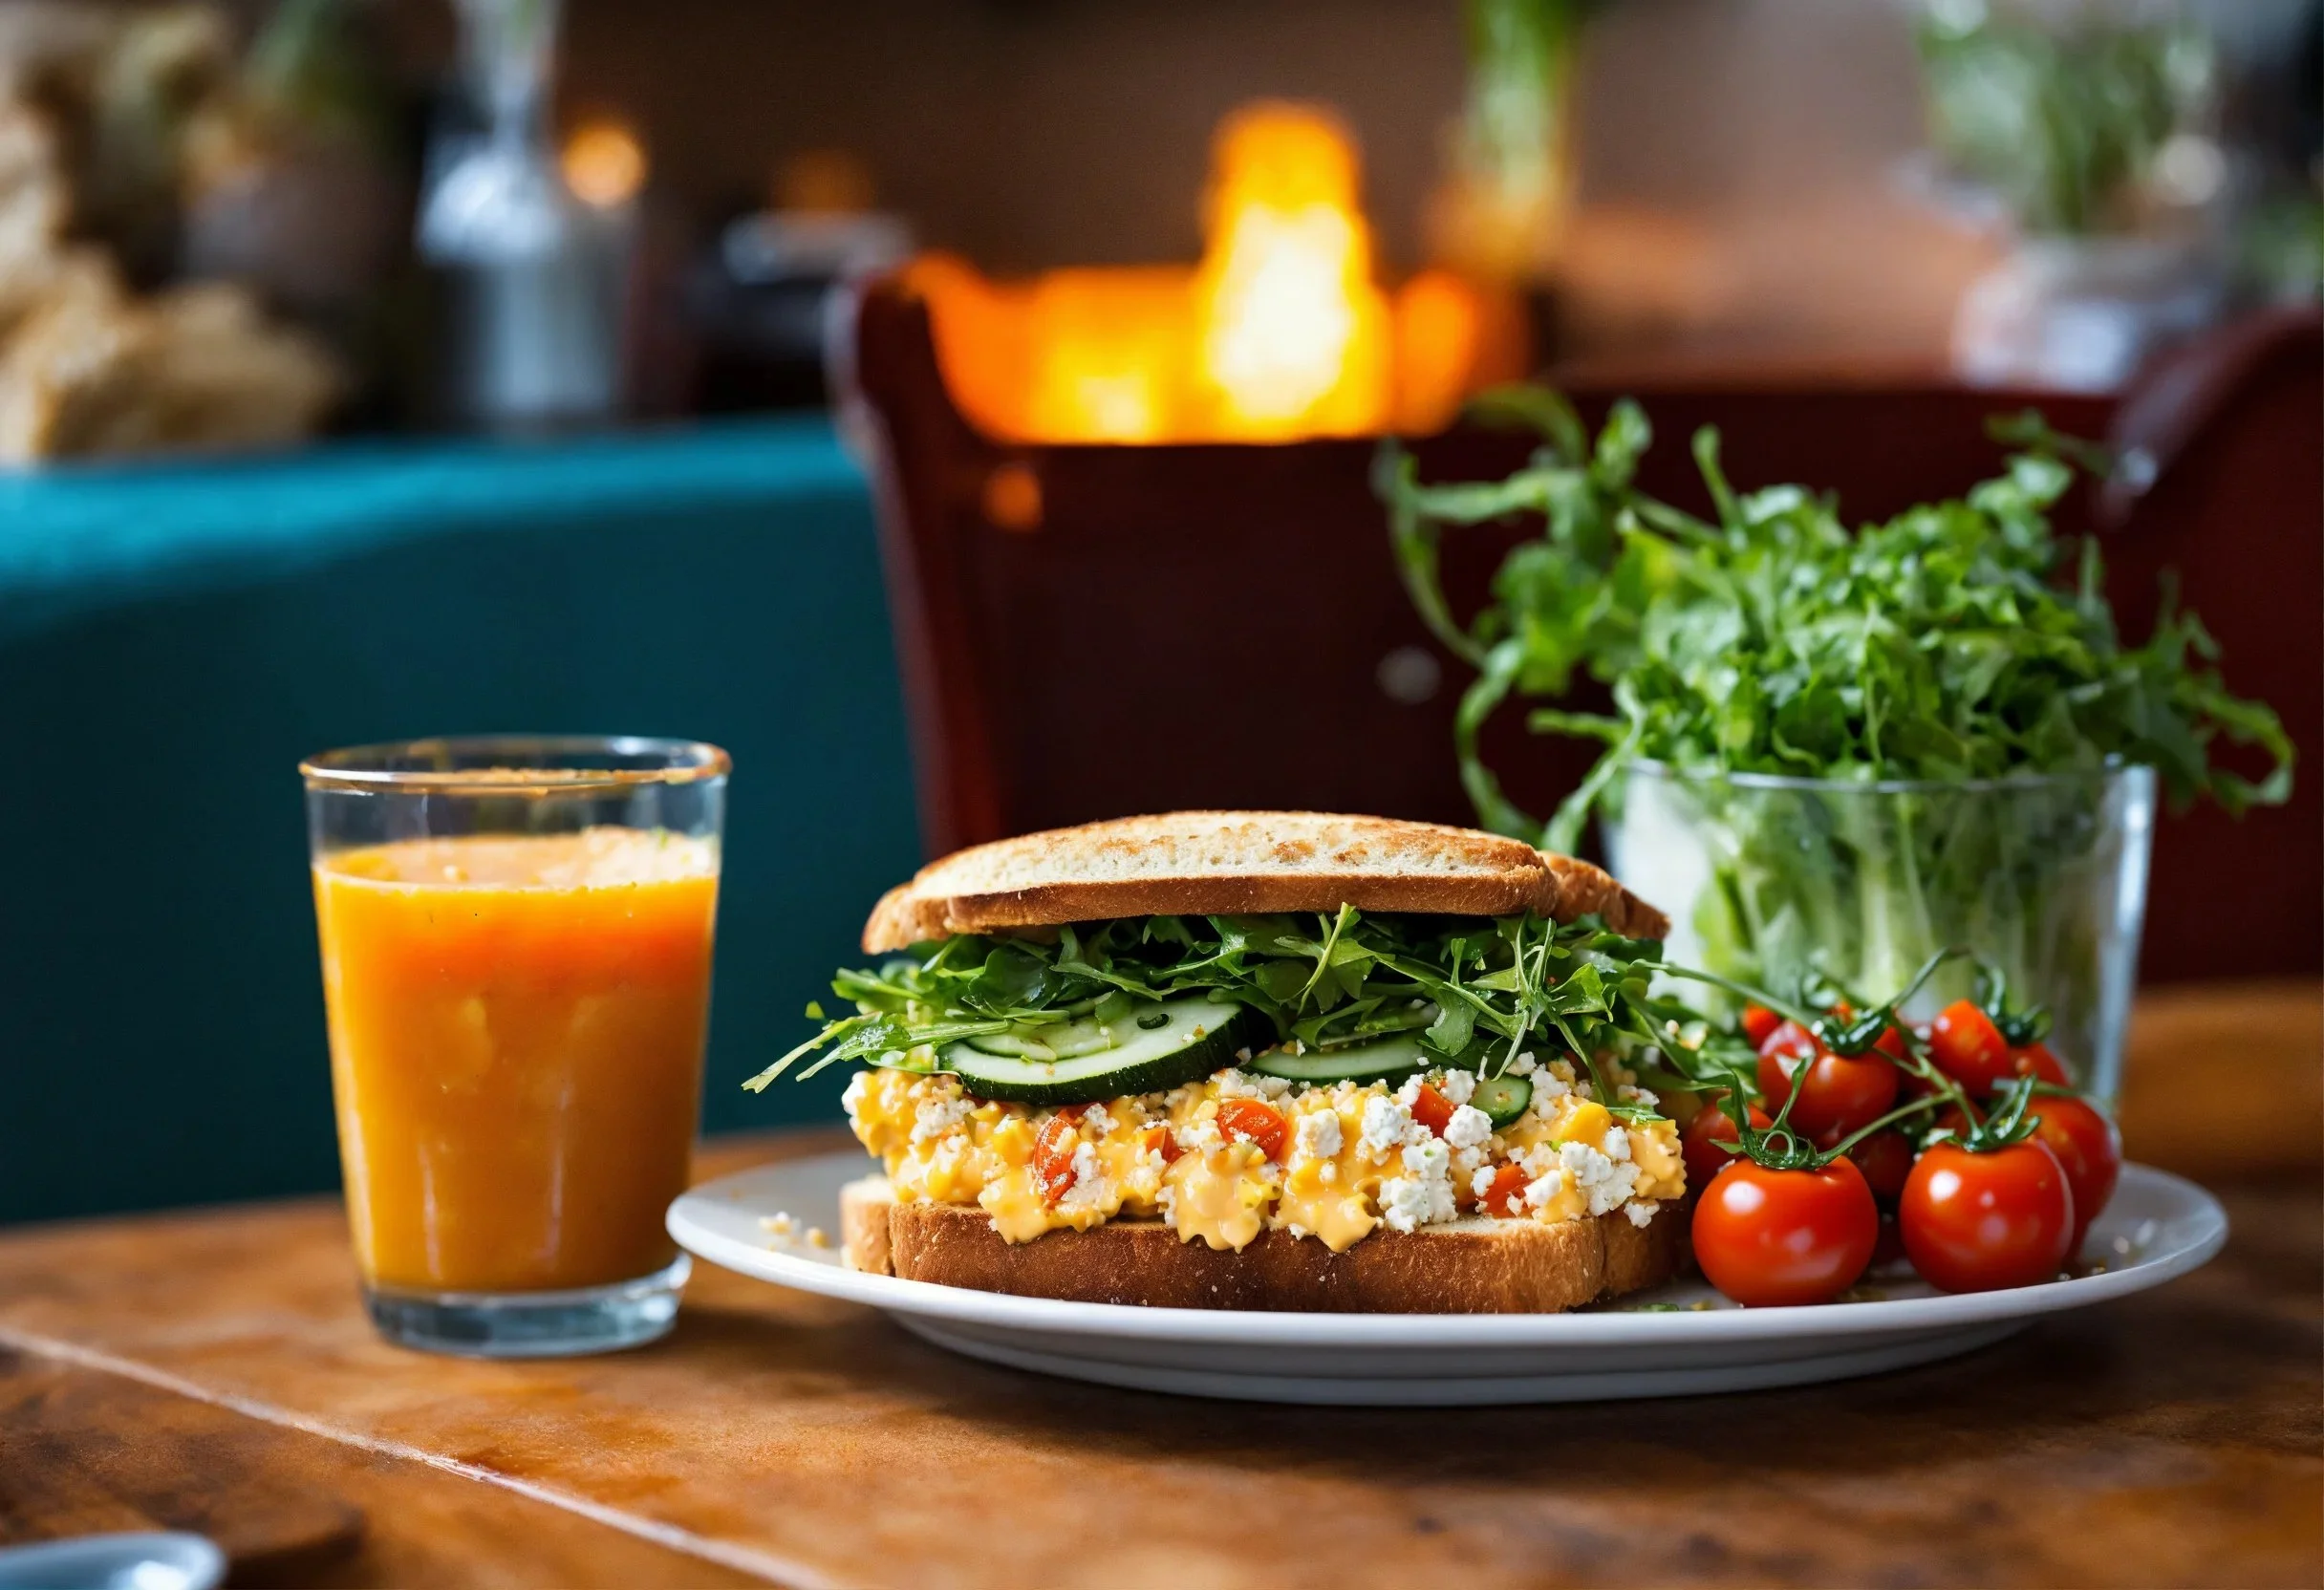 A cozy, appetizing image showing a pimento cheese sandwich with classic side dishes. Imagine a plate with the sandwich, a small bowl of creamy tomato soup, and a side salad, all set on a warm, inviting dining table.